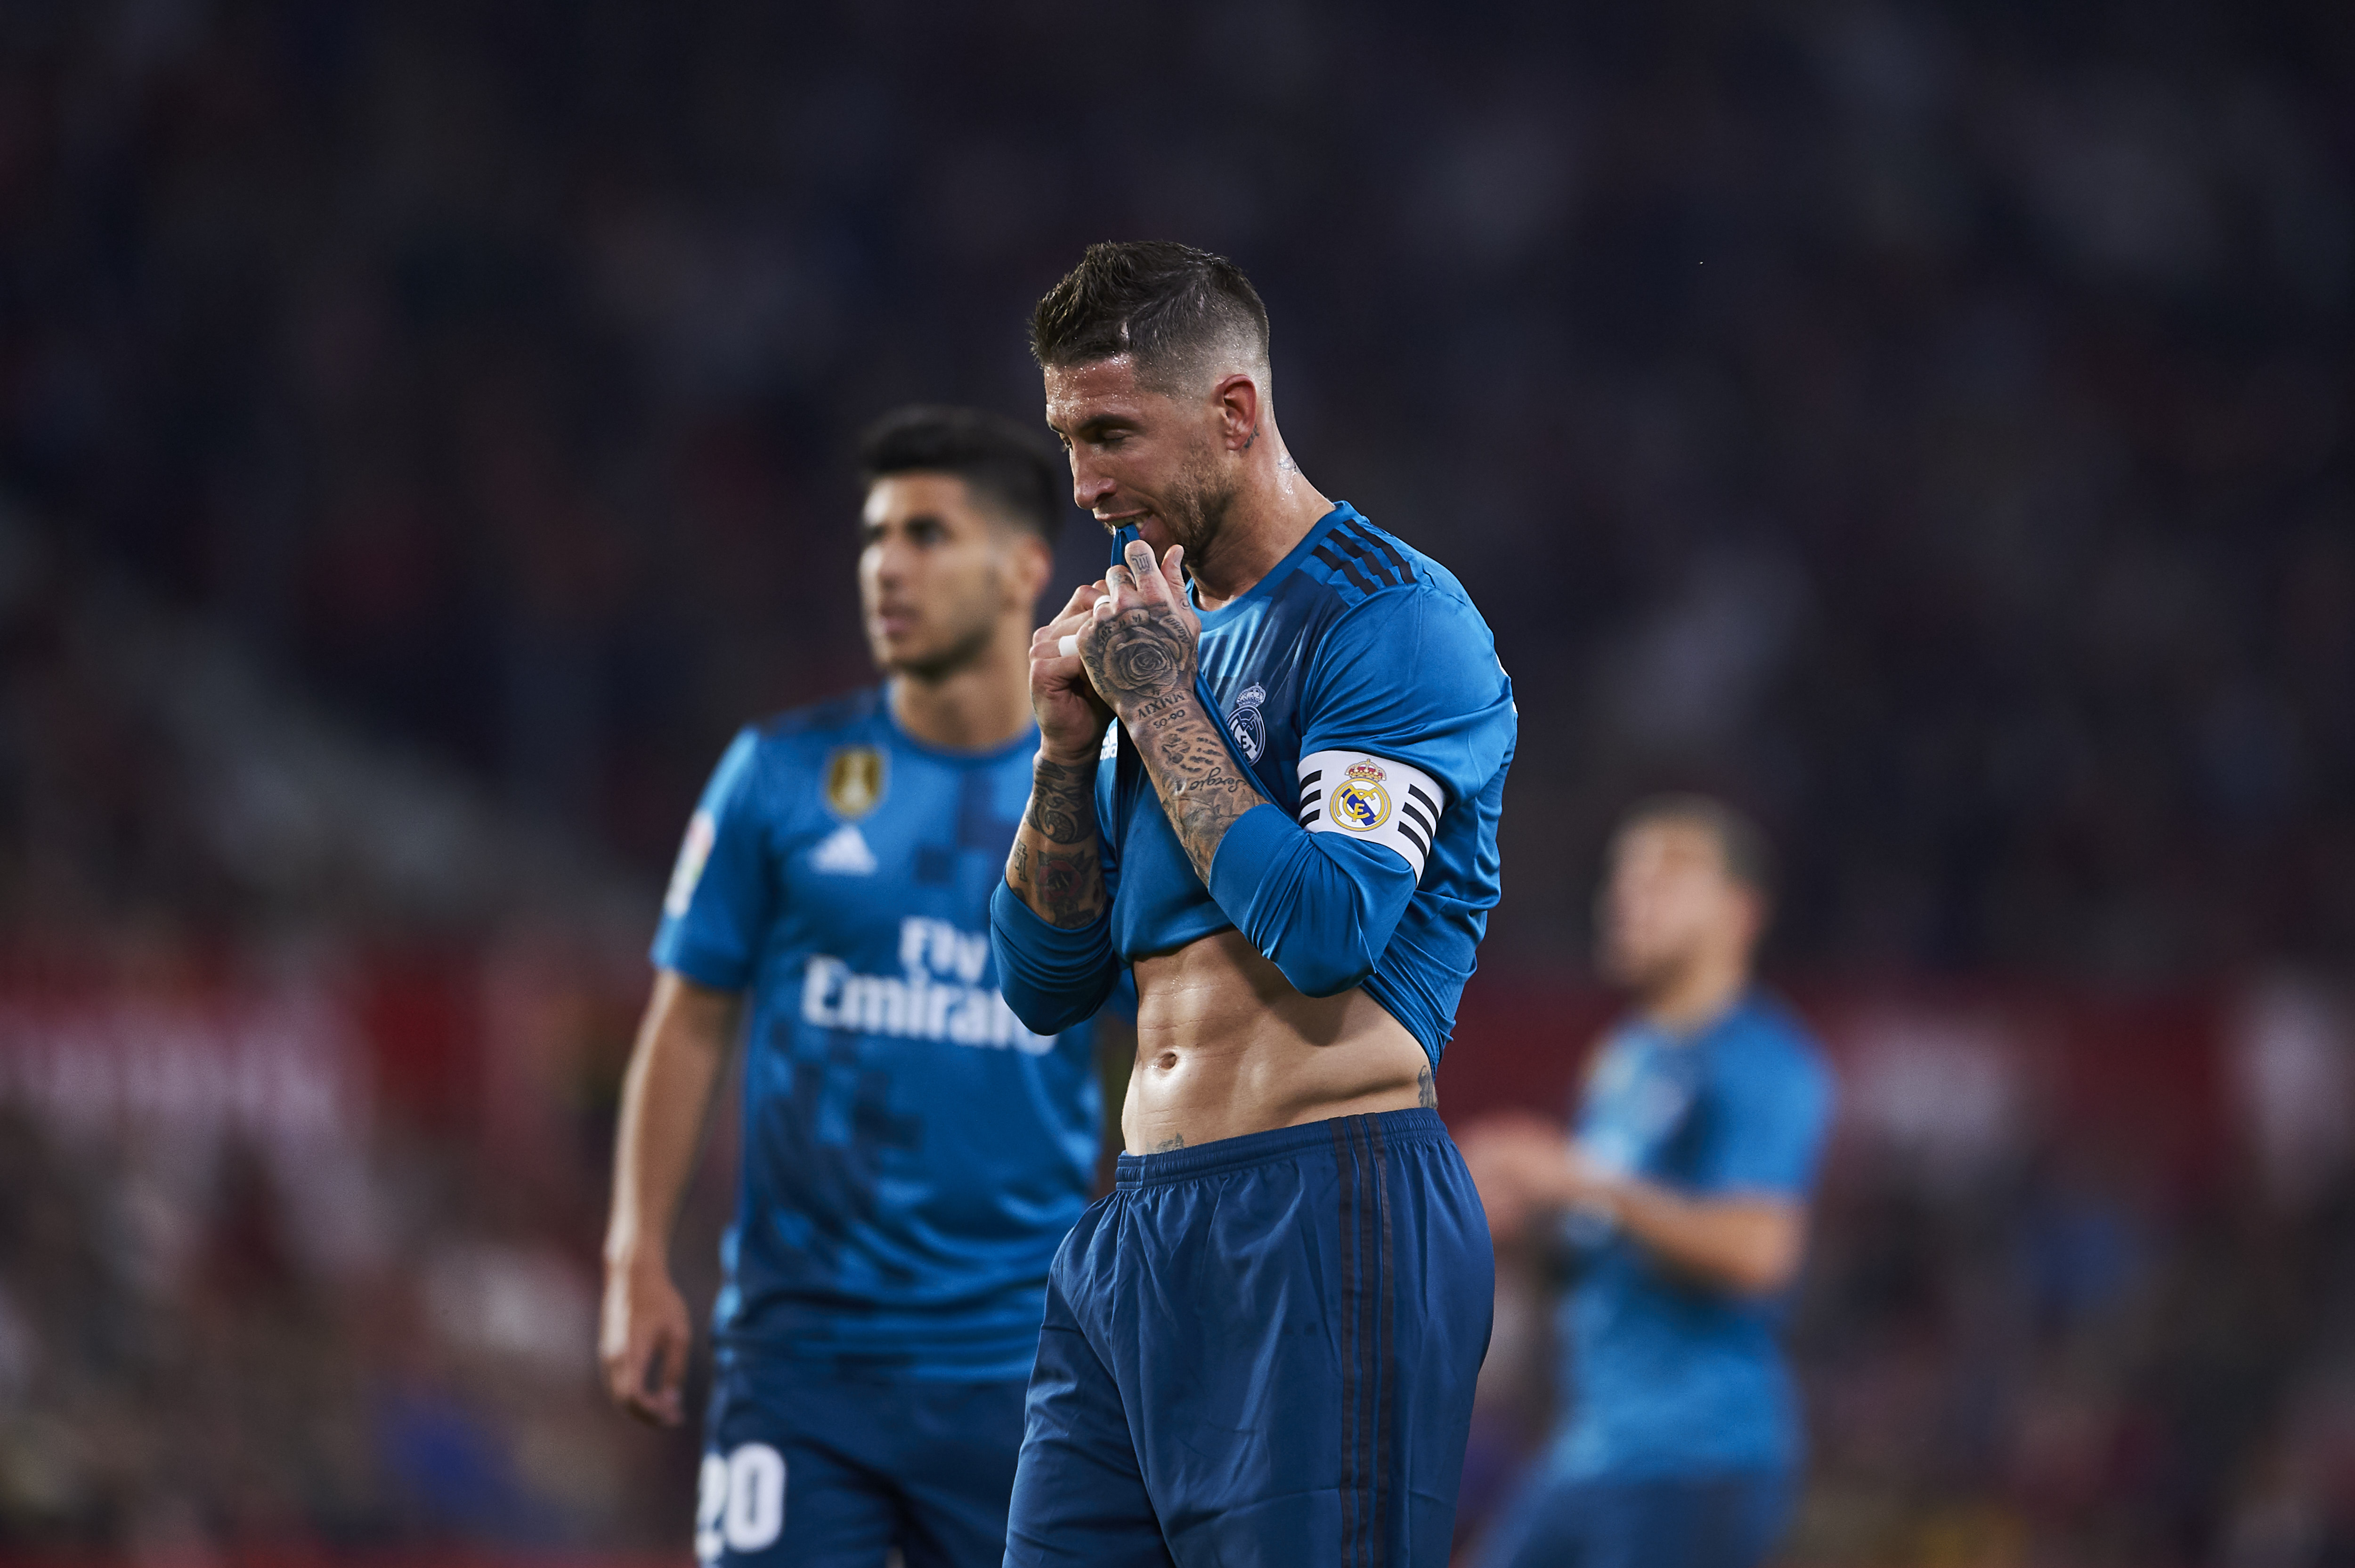 SEVILLE, SPAIN - MAY 09:  Sergio Ramos of Real Madrid CF reacts during the La Liga match between Sevilla FC and Real Madrid at Ramon Sanchez Pizjuan stadium on May 9, 2018 in Seville, Spain.  (Photo by Aitor Alcalde/Getty Images)